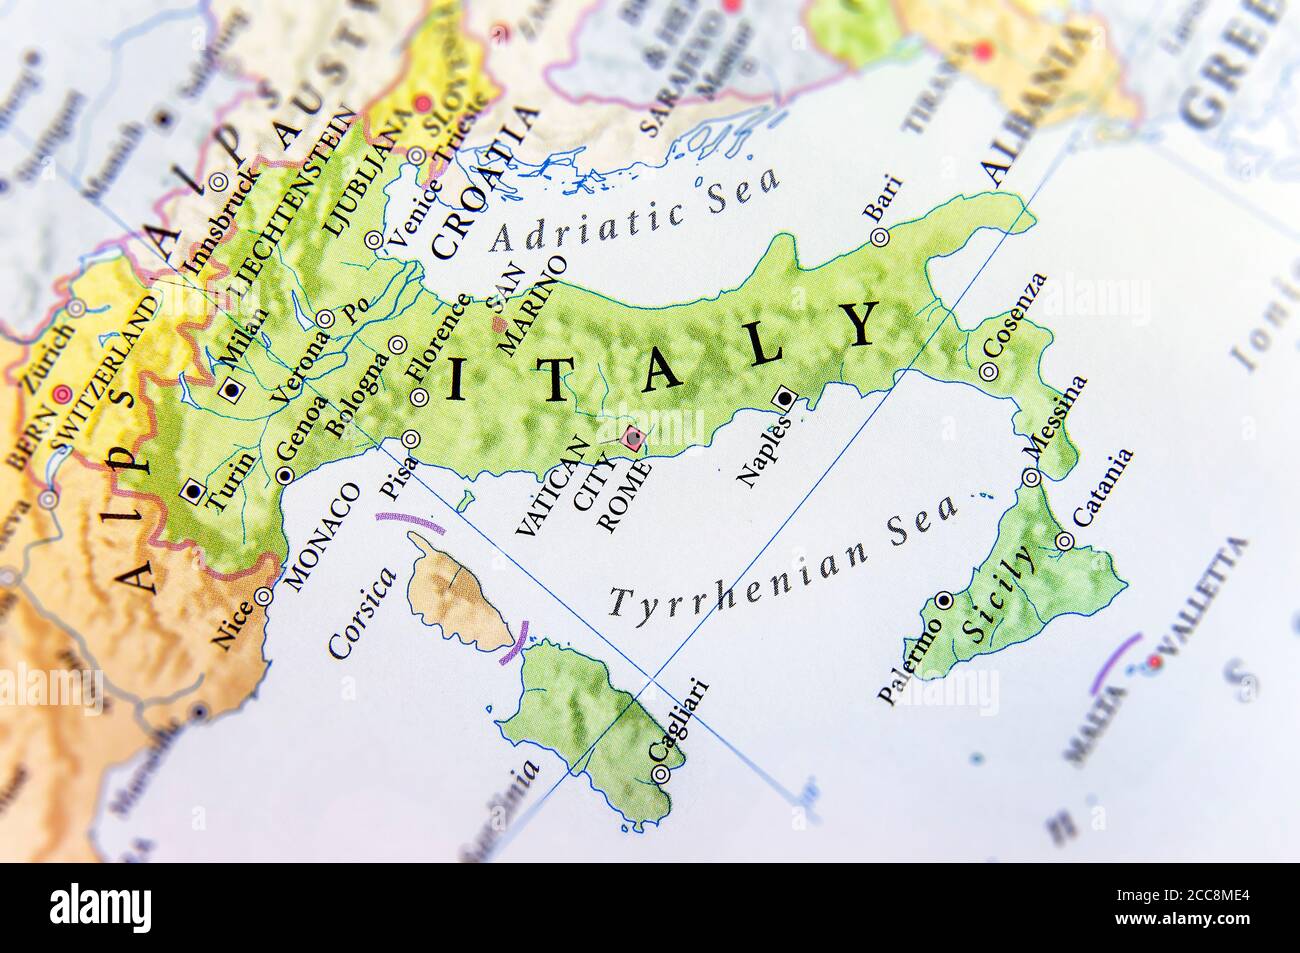 Geographic map of European country Italy with important cities Stock Photo